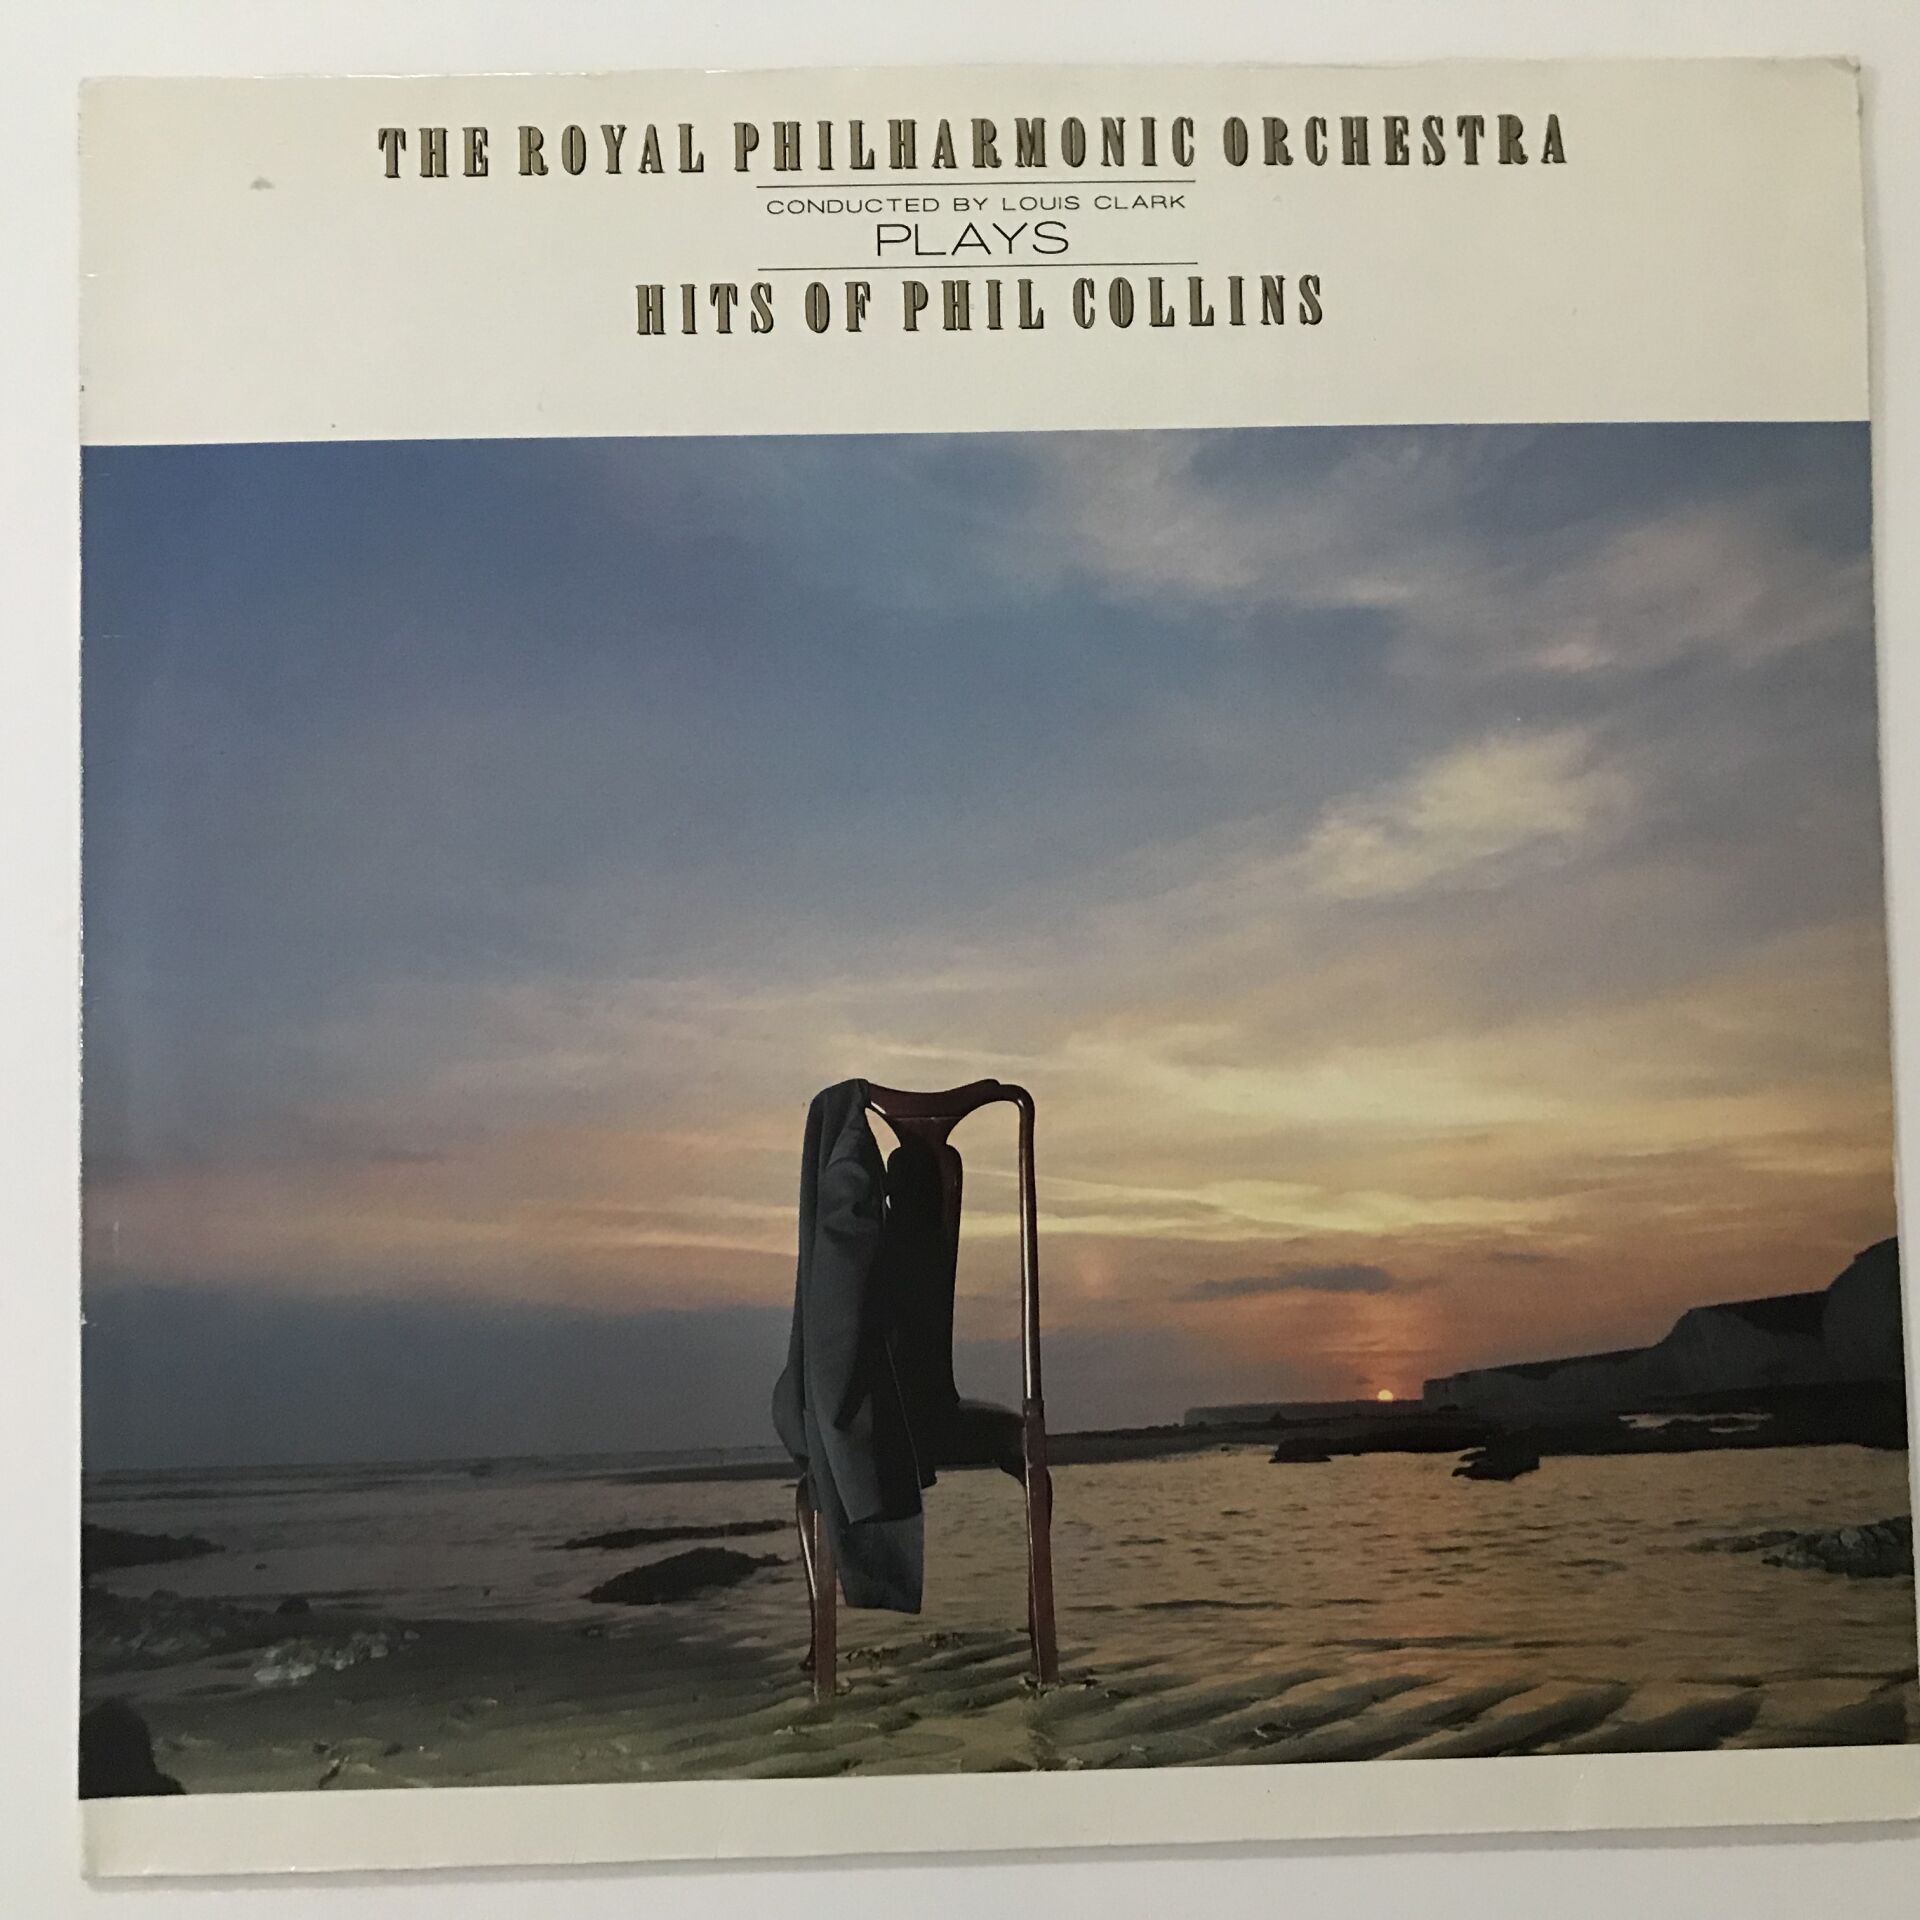 The Royal Philharmonic Orchestra Conducted By Louis Clark – The Royal Philharmonic Orchestra Plays Hits Of Phil Collins